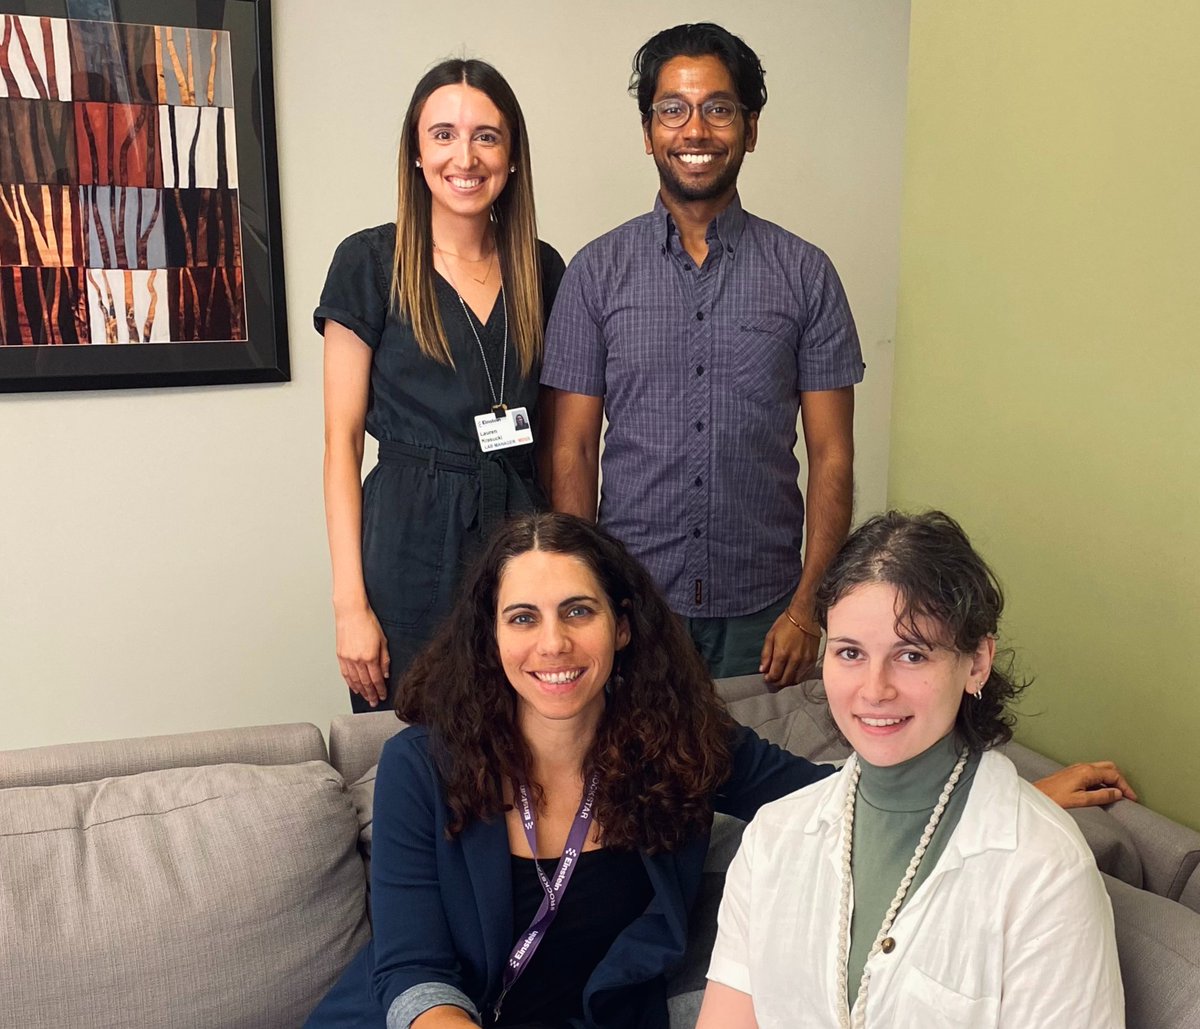 MRRI's Brain Injury Neuropsychology Lab, led by @arabinow researches long-term brain injury effects (#TBI), examining psychosocial factors like self-regulation and using mobile tech for assessments. Learn more: research.jefferson.edu/labs/researche…